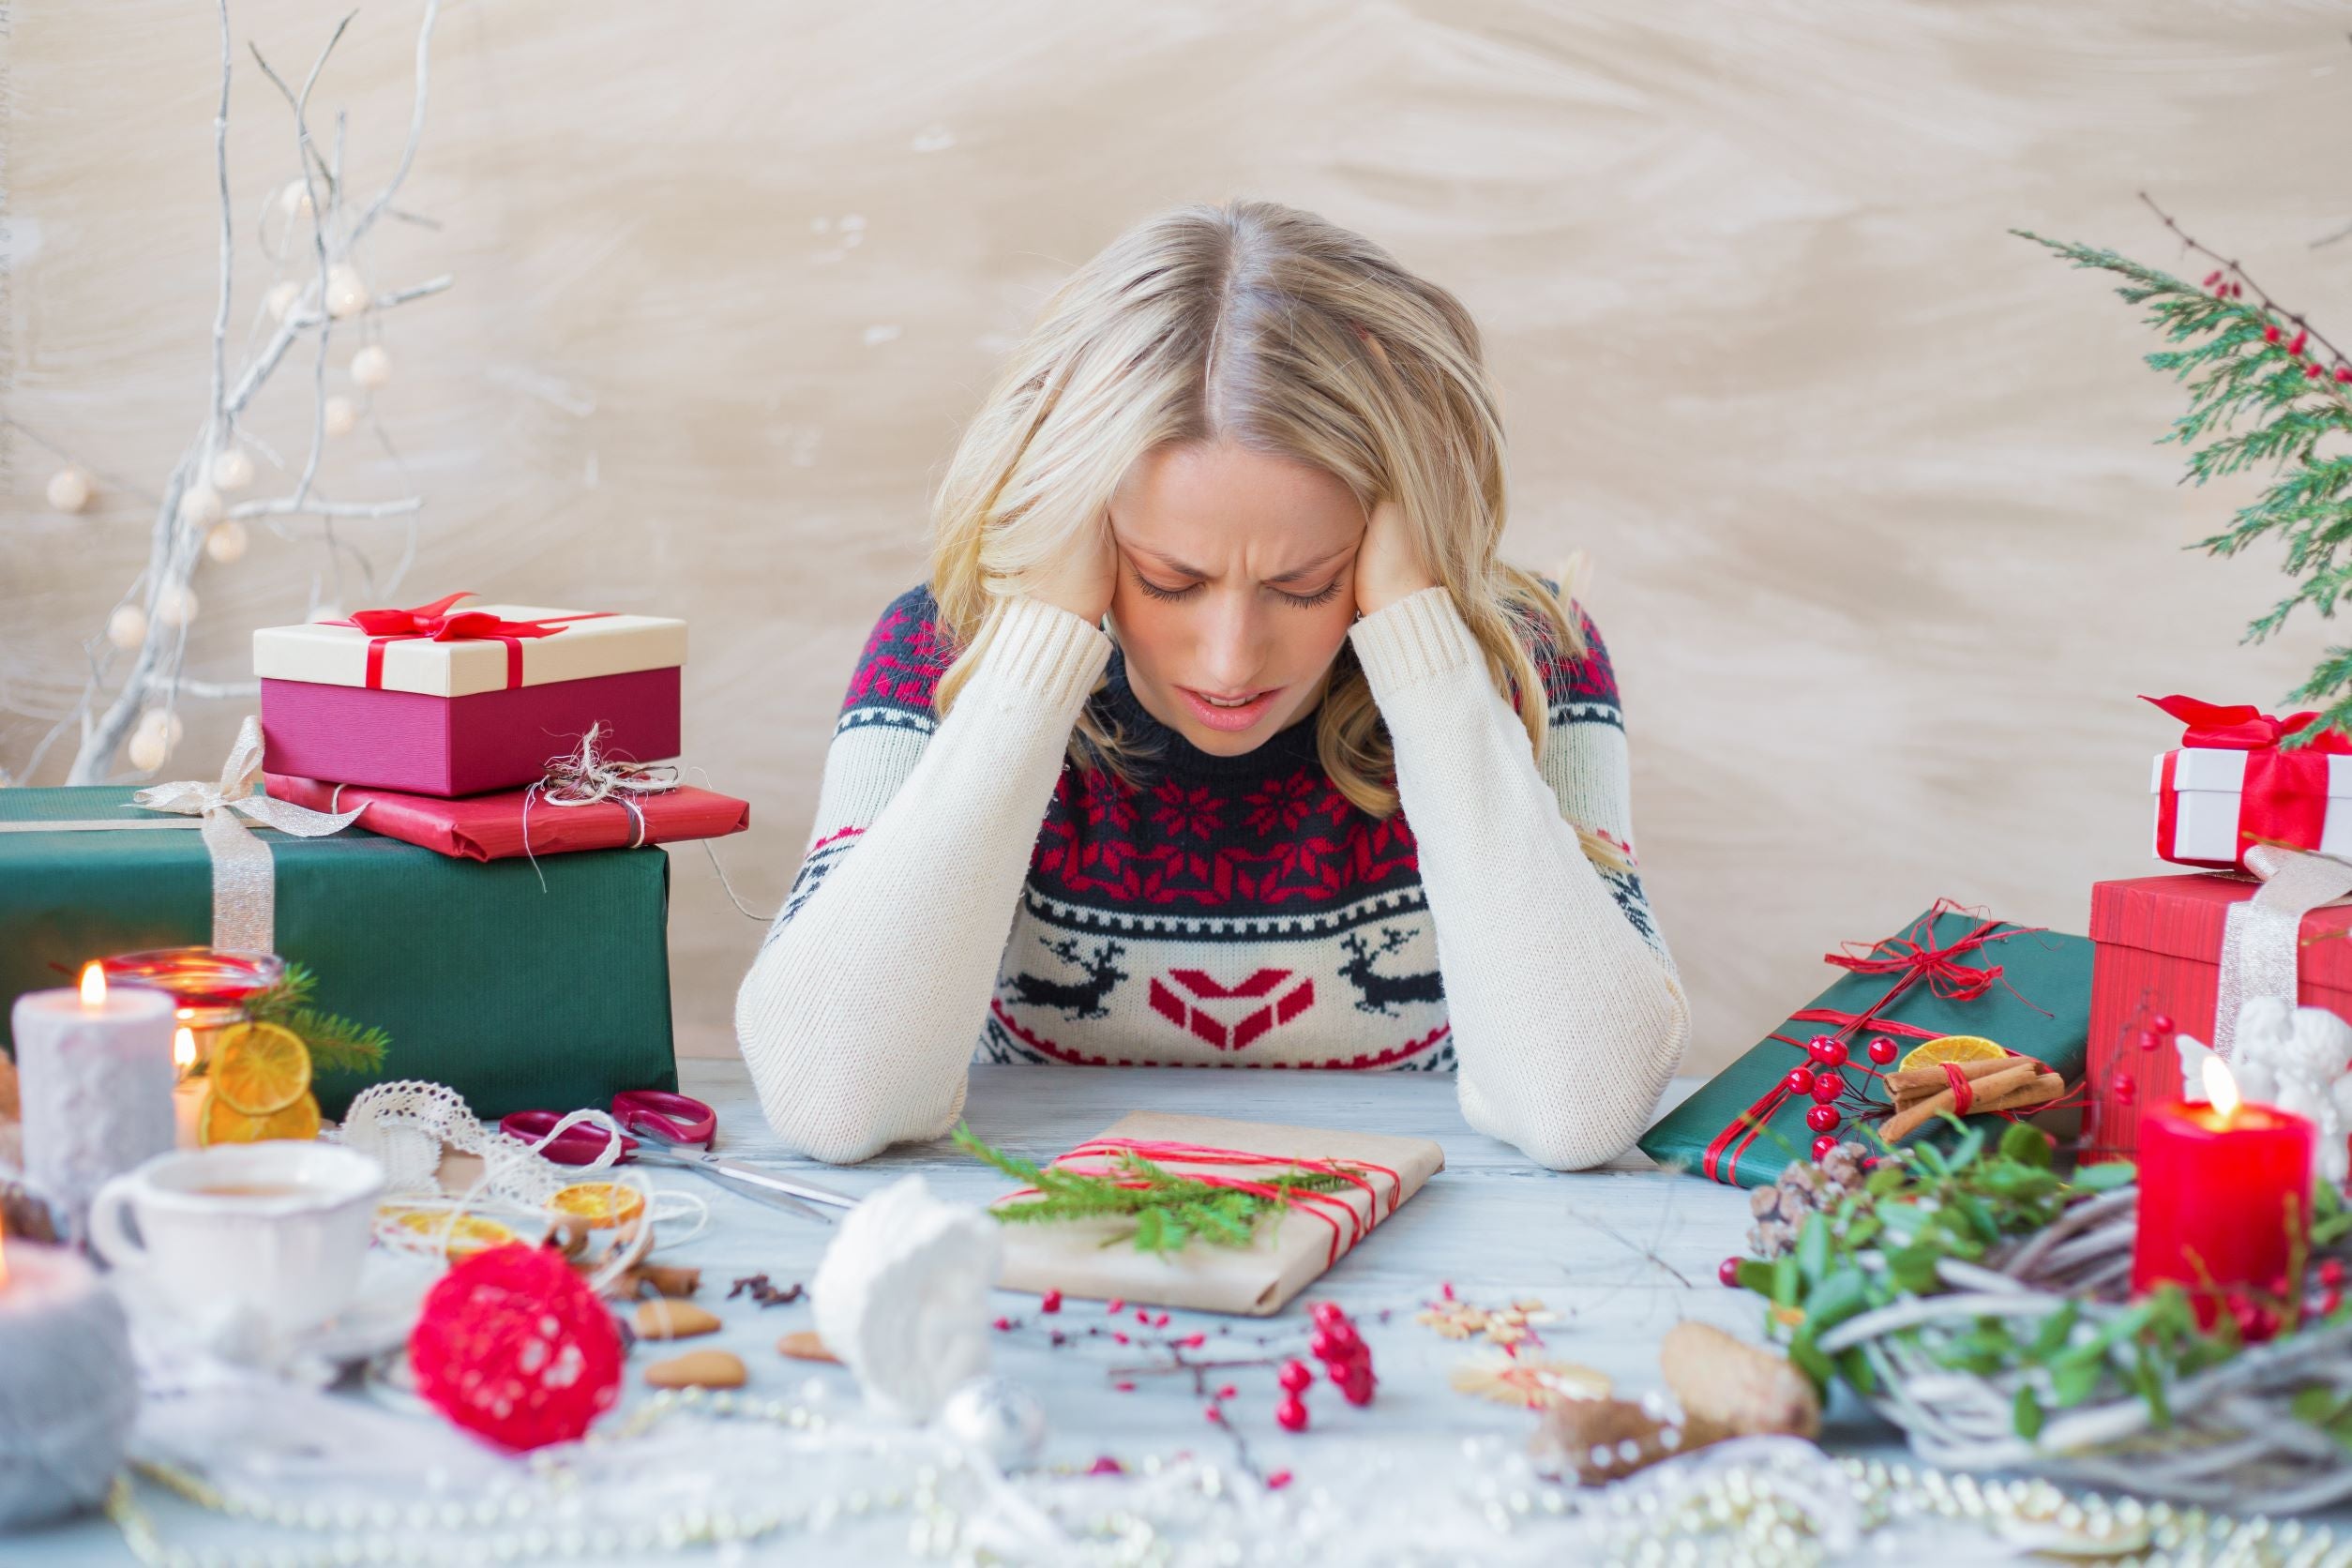 How To Take Care Of Yourself During The Holidays